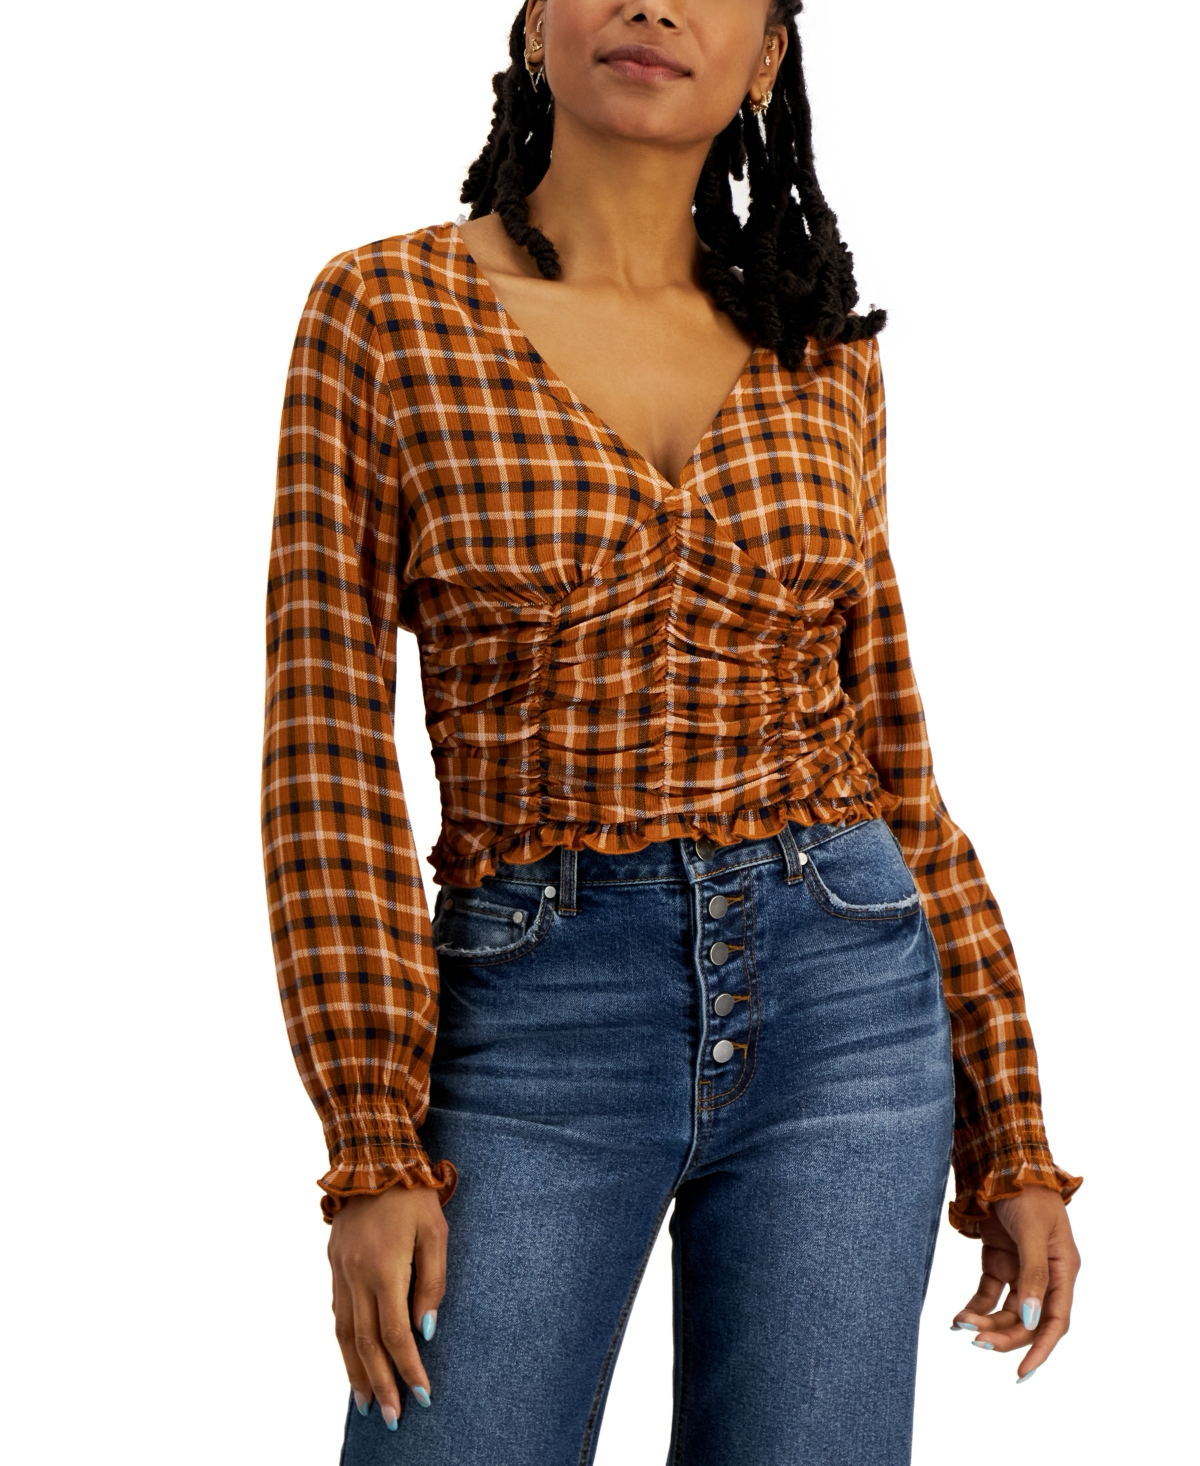 JUNIORS' SMOCKED LONG-SLEEVE TOP IN SUGAR ALMOND PLAID Level up your off-duty looks with this cute smocked top from Crave Fame. It's perfect with your favorite blue jeans and booties. Juniors Juniors' Clothing - Tops